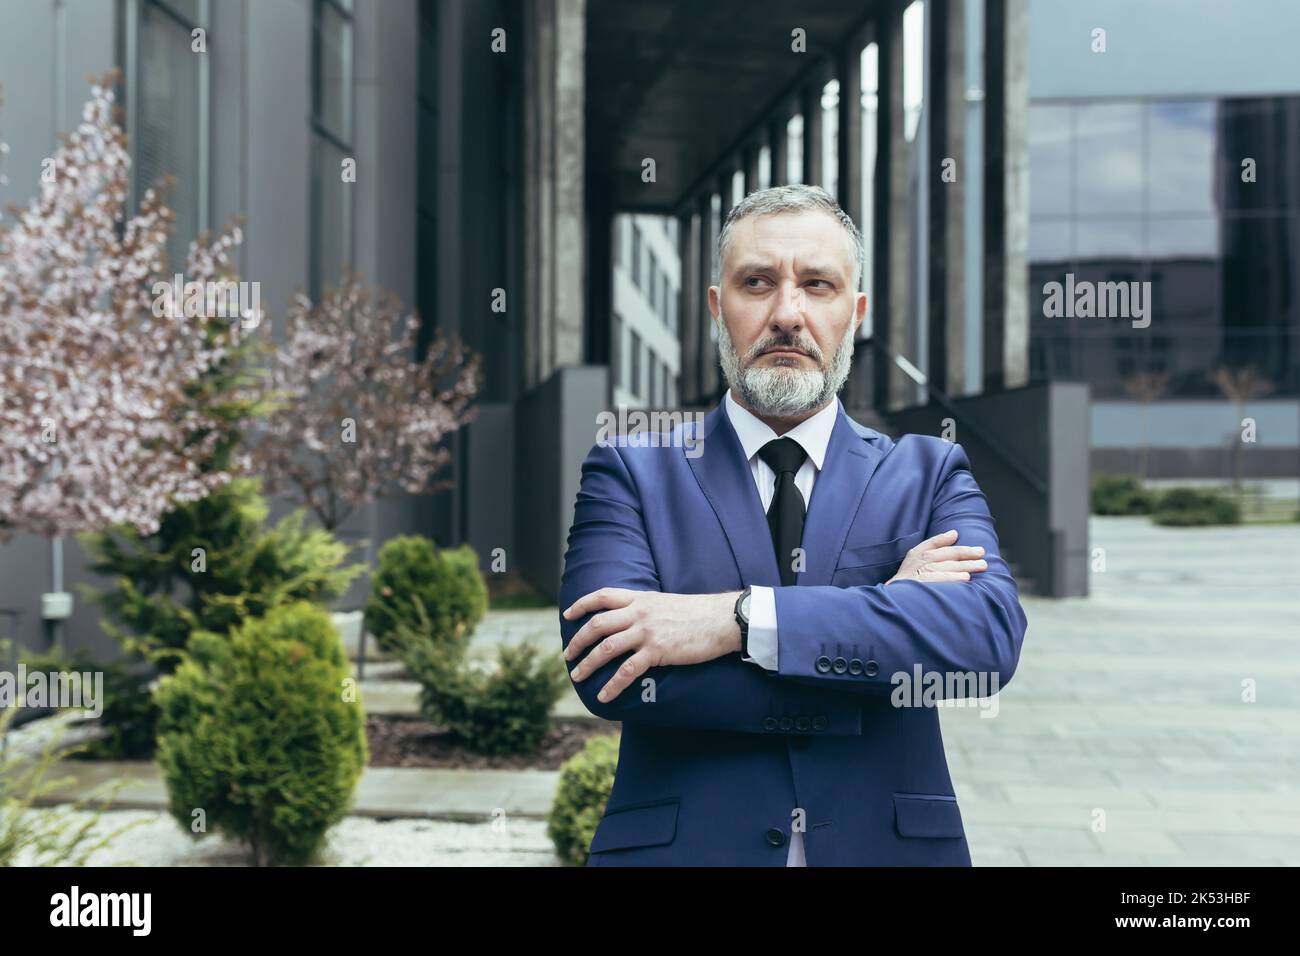 Portrait of a senior gray-haired man director, ceo on the background of the office center and trees. He is standing serious in a suit with tie, arms crossed in front, looking to the side. Stock Photo